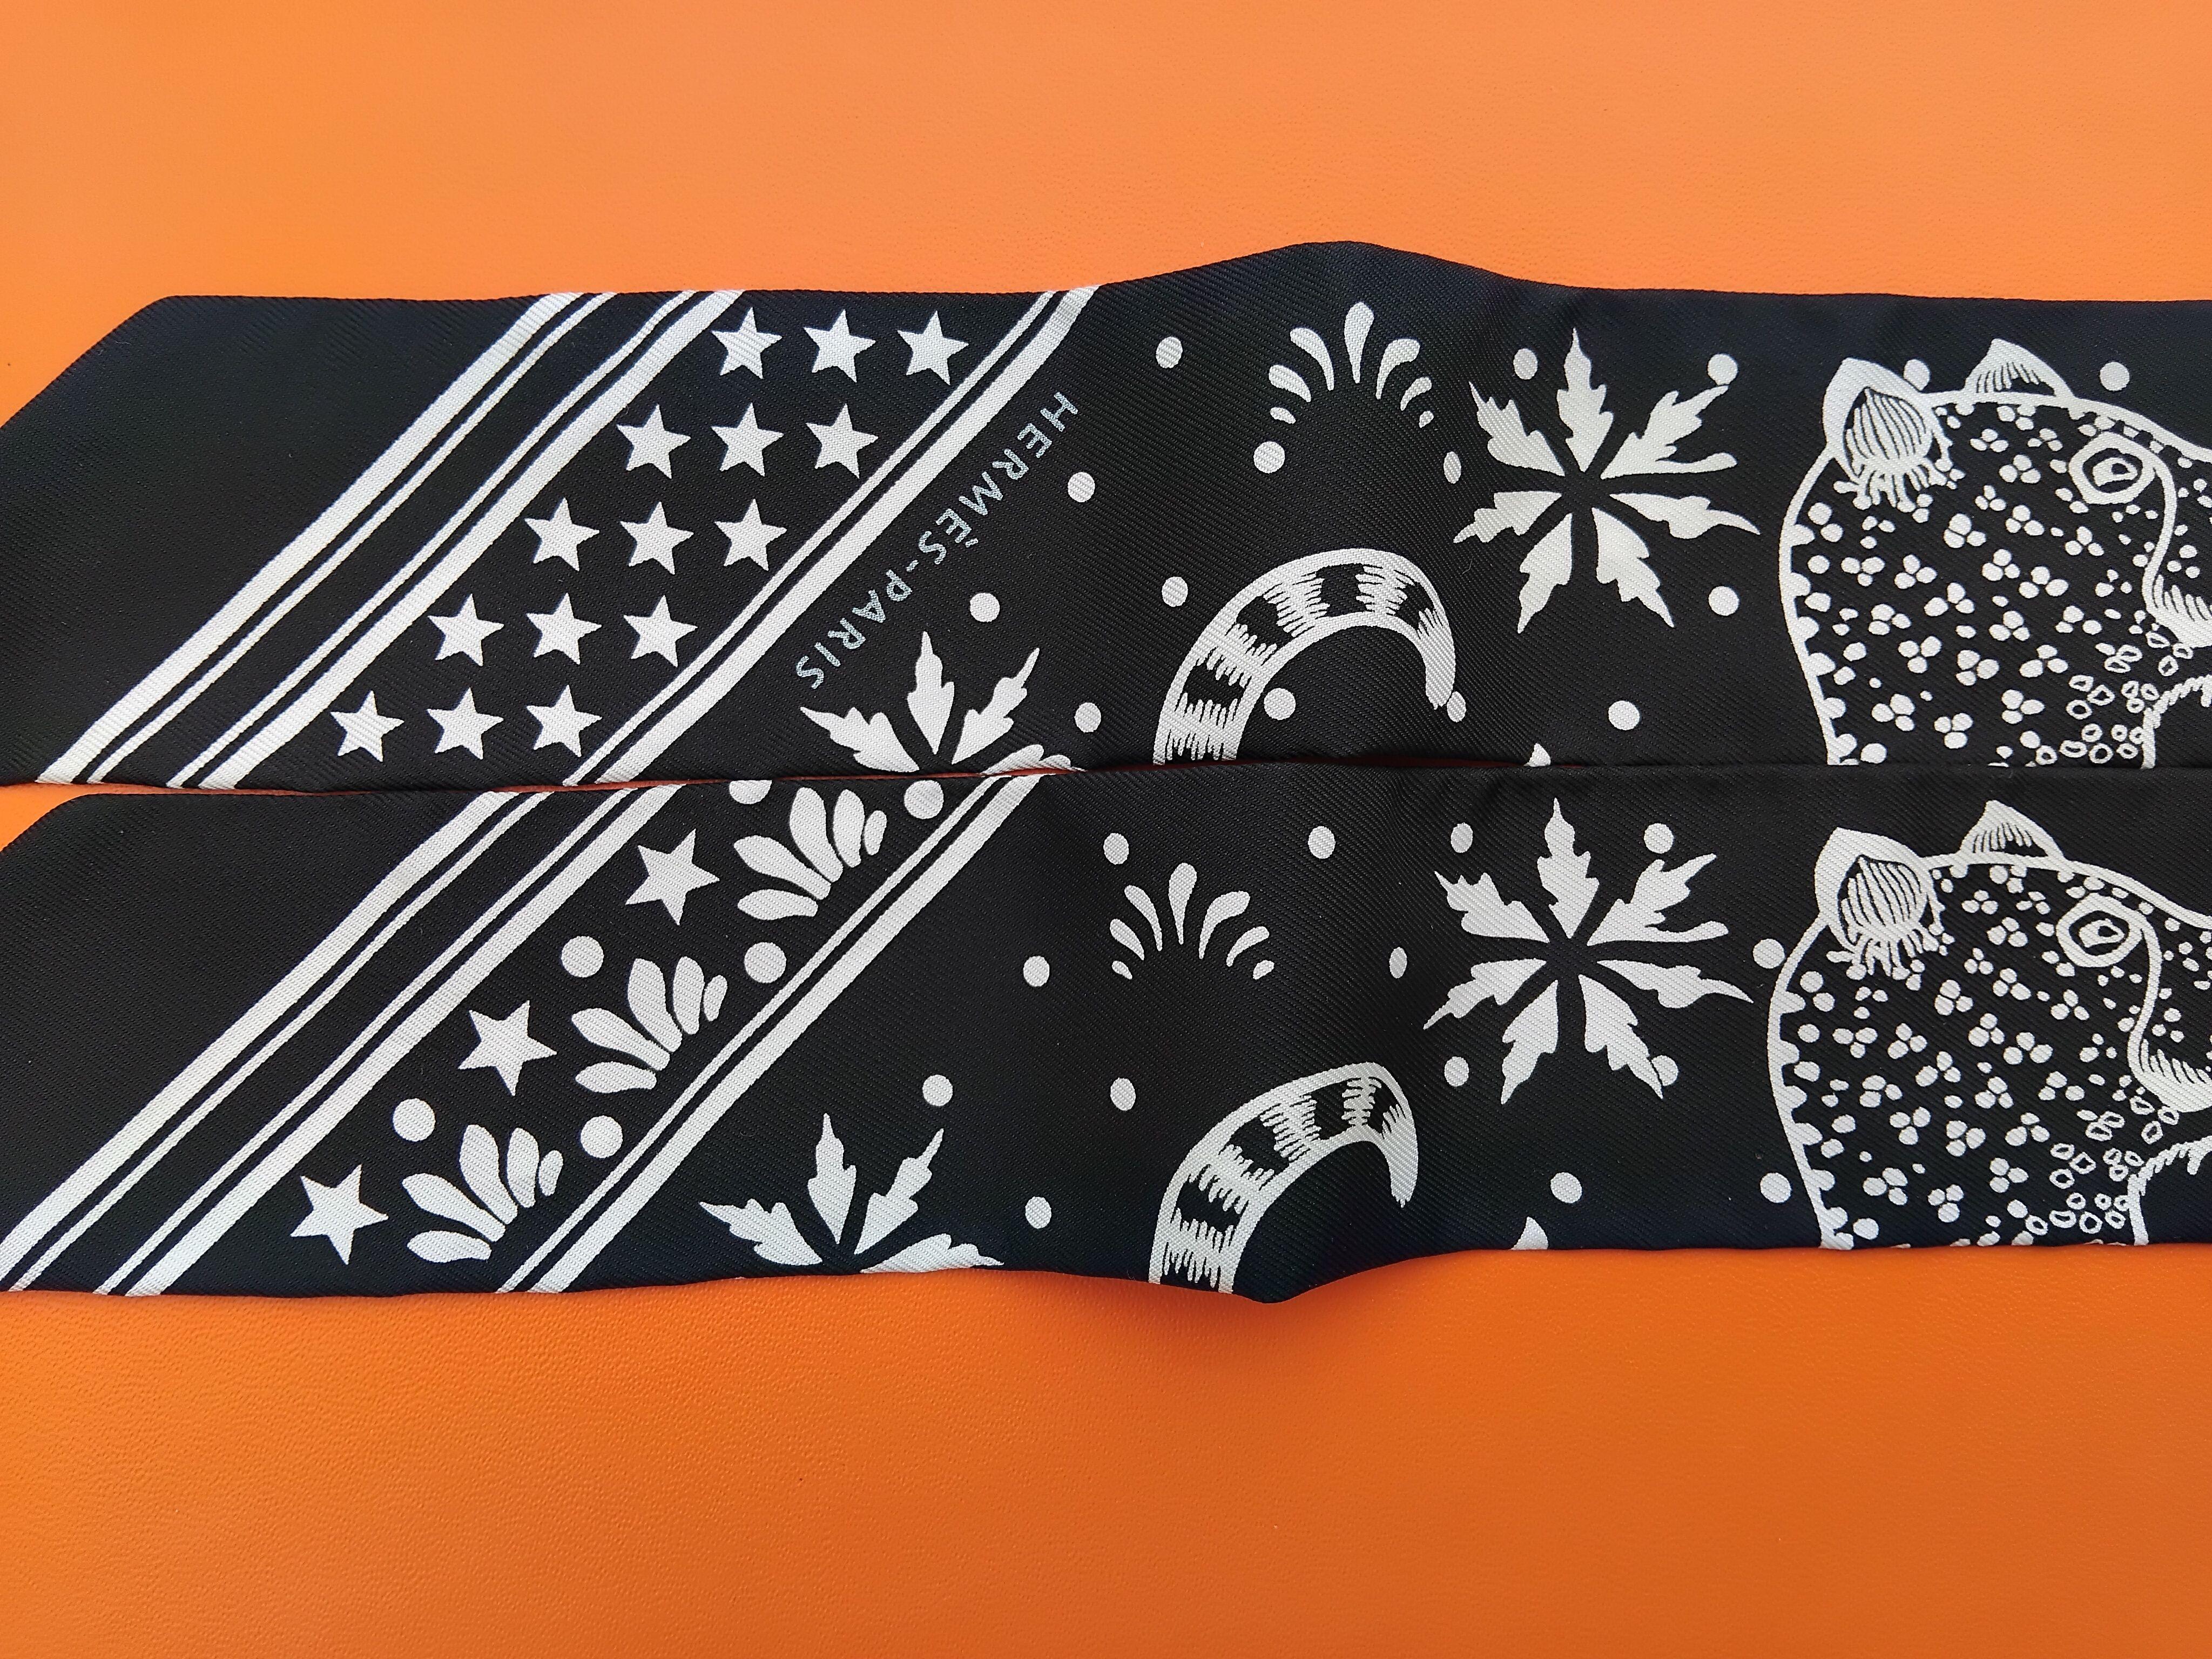 Beautiful Authentic Hermès Scarf

« Twilly » Version

Print: “ LES LEOPARDS”

Designed by Christiane Vauzelles

Made in France

Made of 100% Silk

Colorways: NOIR / BLANC / NOIR (black / white / black)

